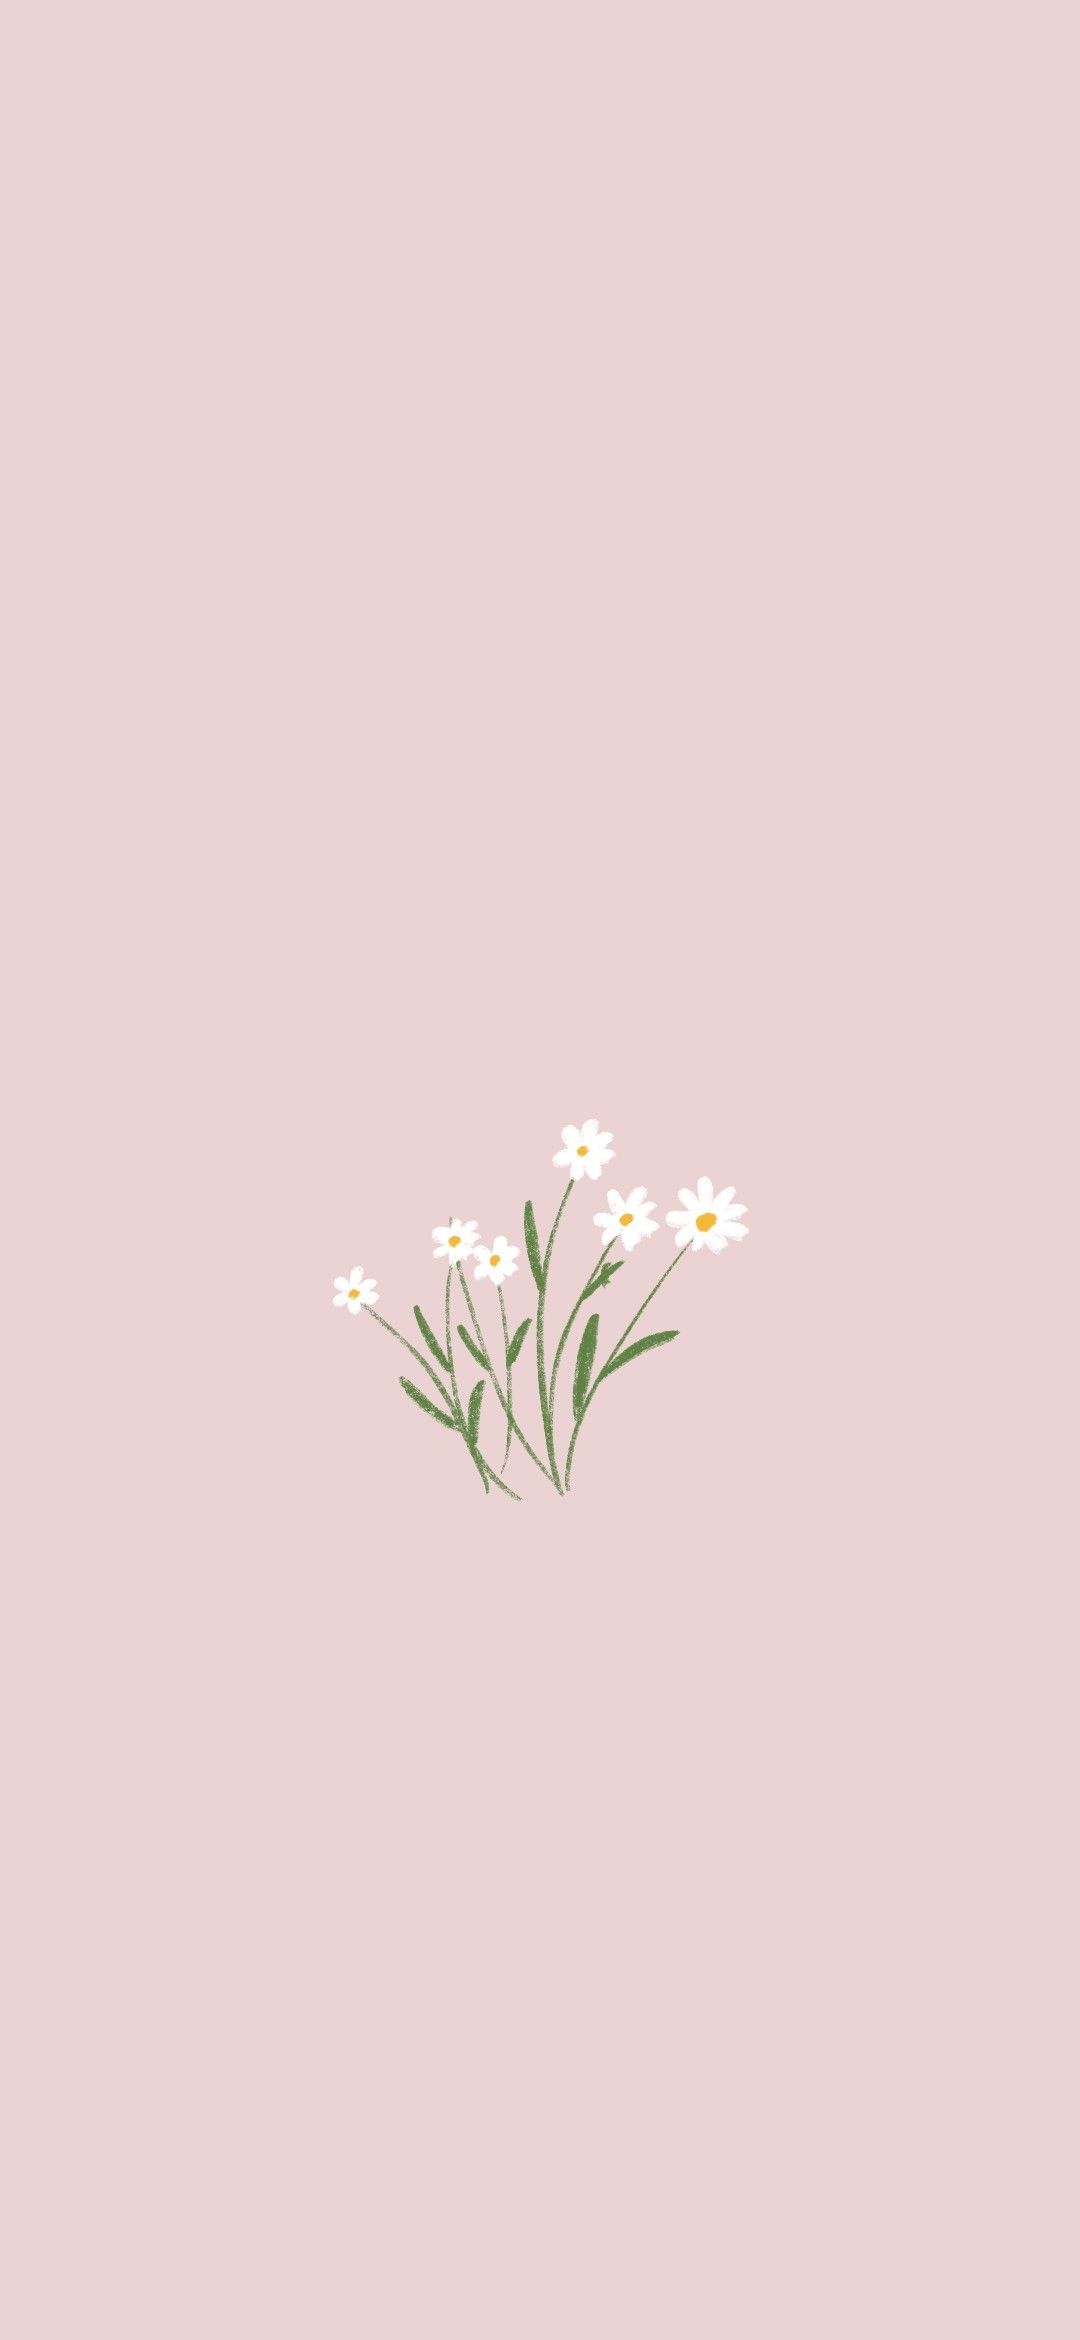 Simple Floral iPhone Wallpapers - Top Free Simple Floral iPhone ...